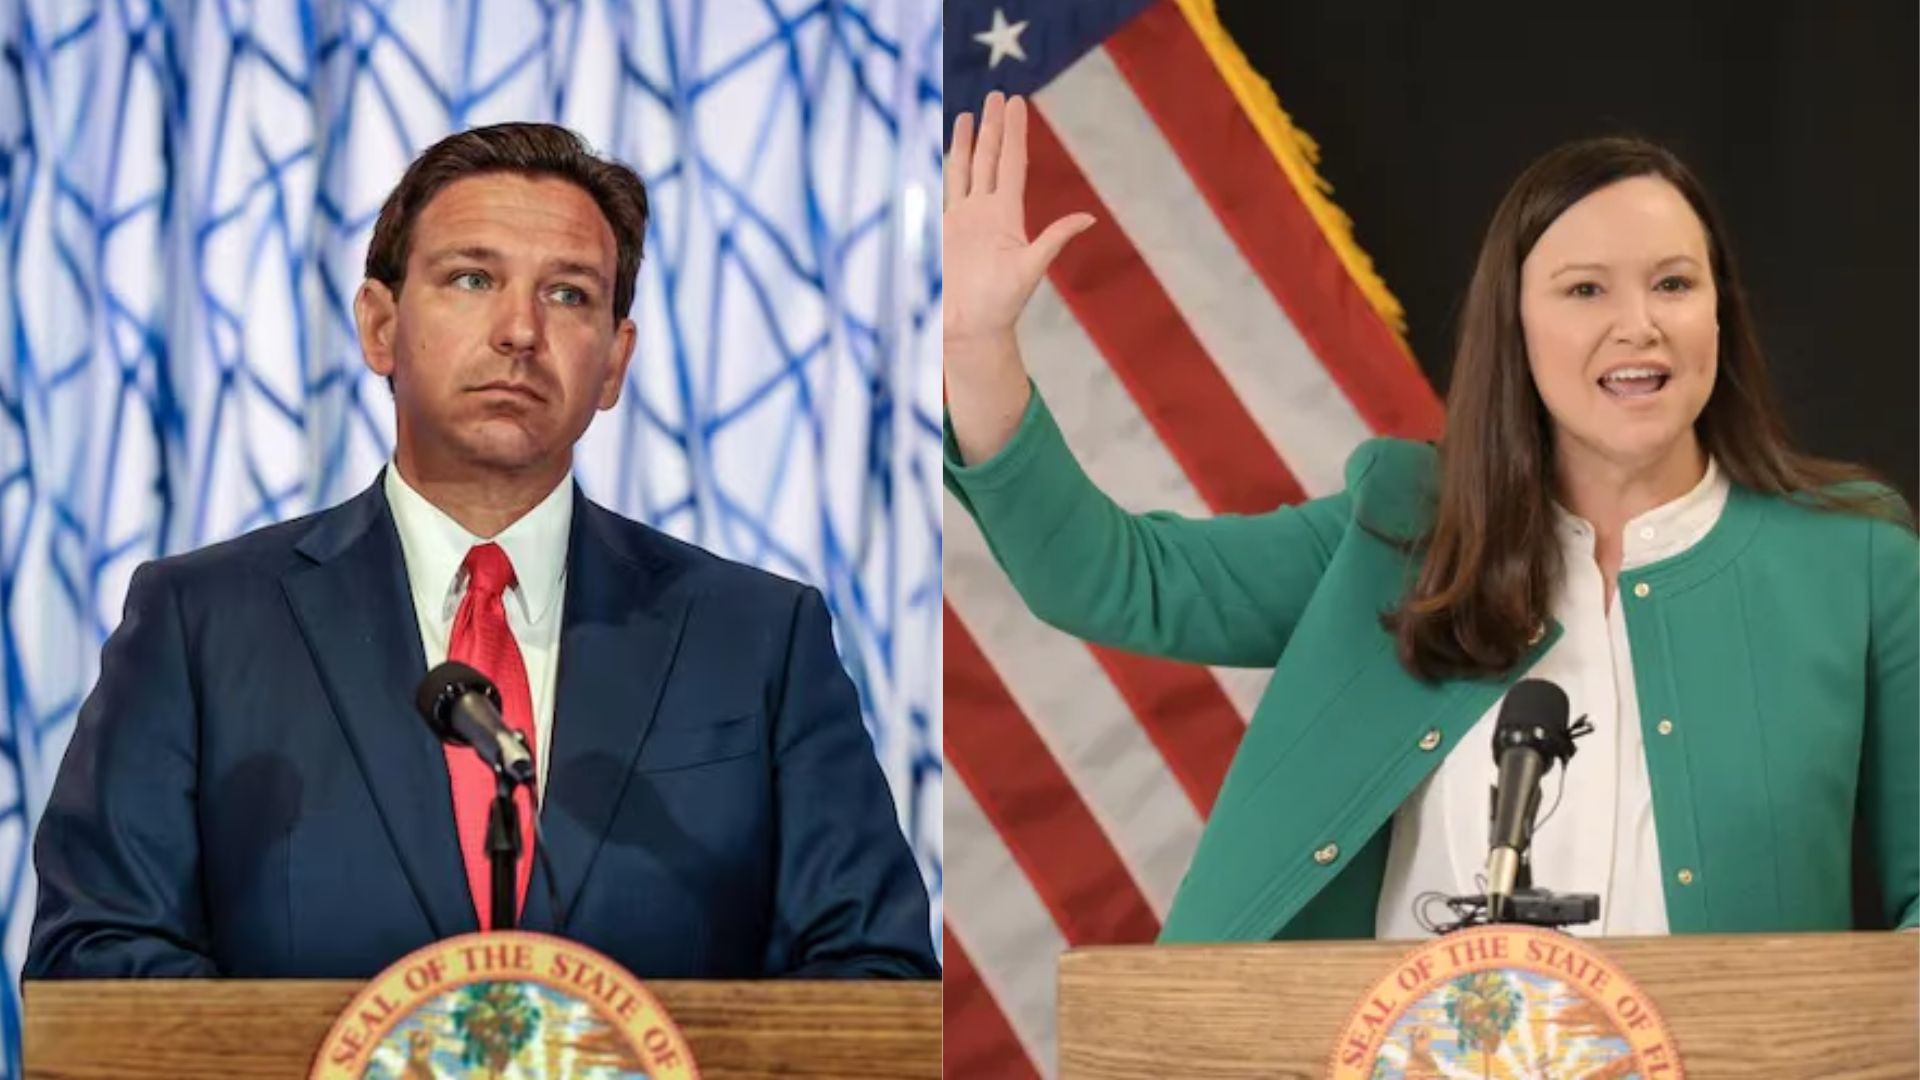 Governor Ron DeSantis and AG Moody announced their intent to investigate Starbucks